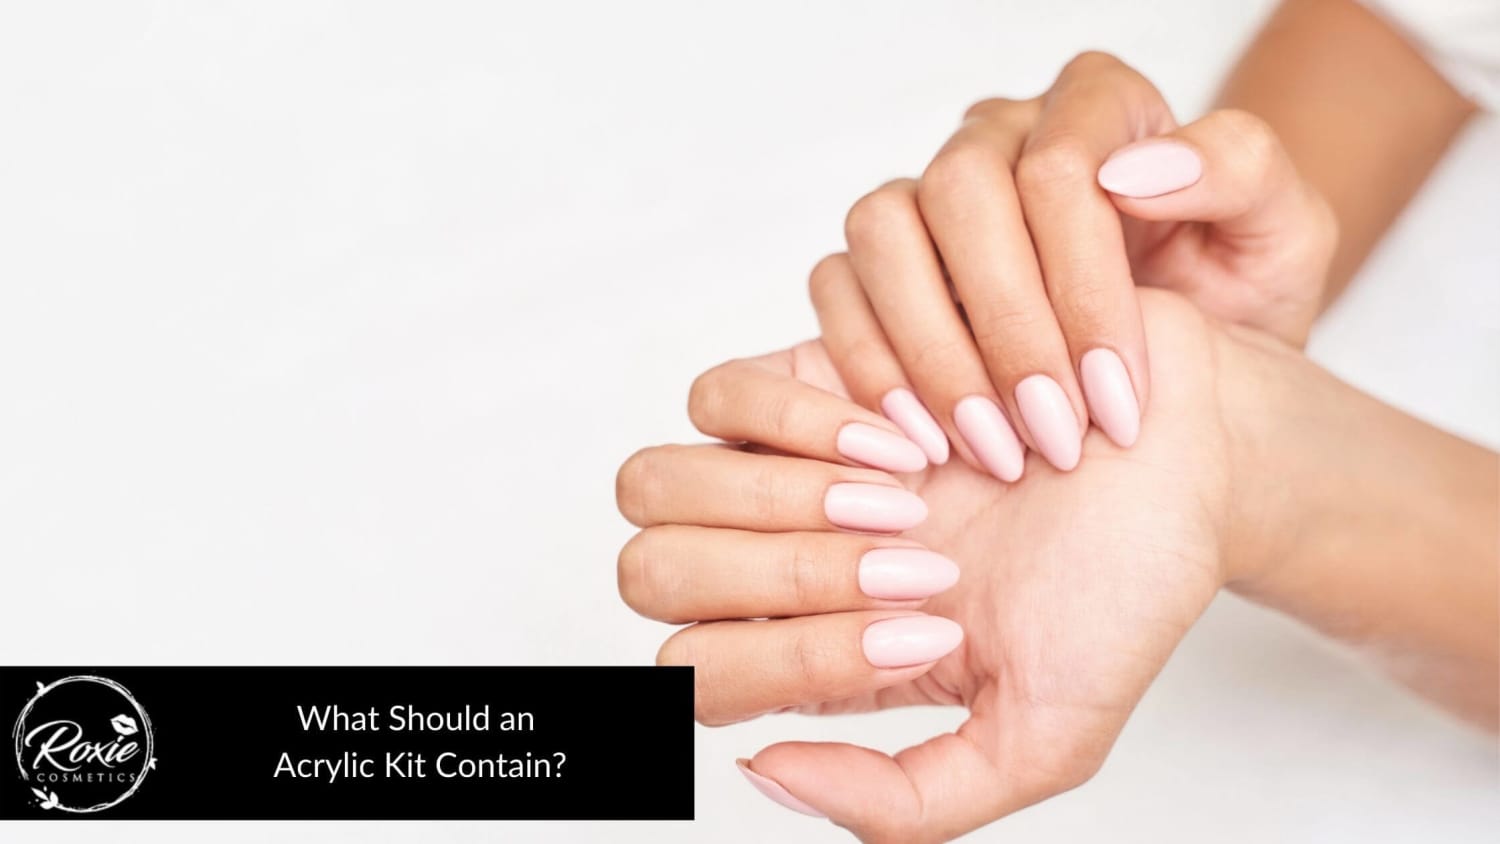 What should an acrylic nail kit contain?